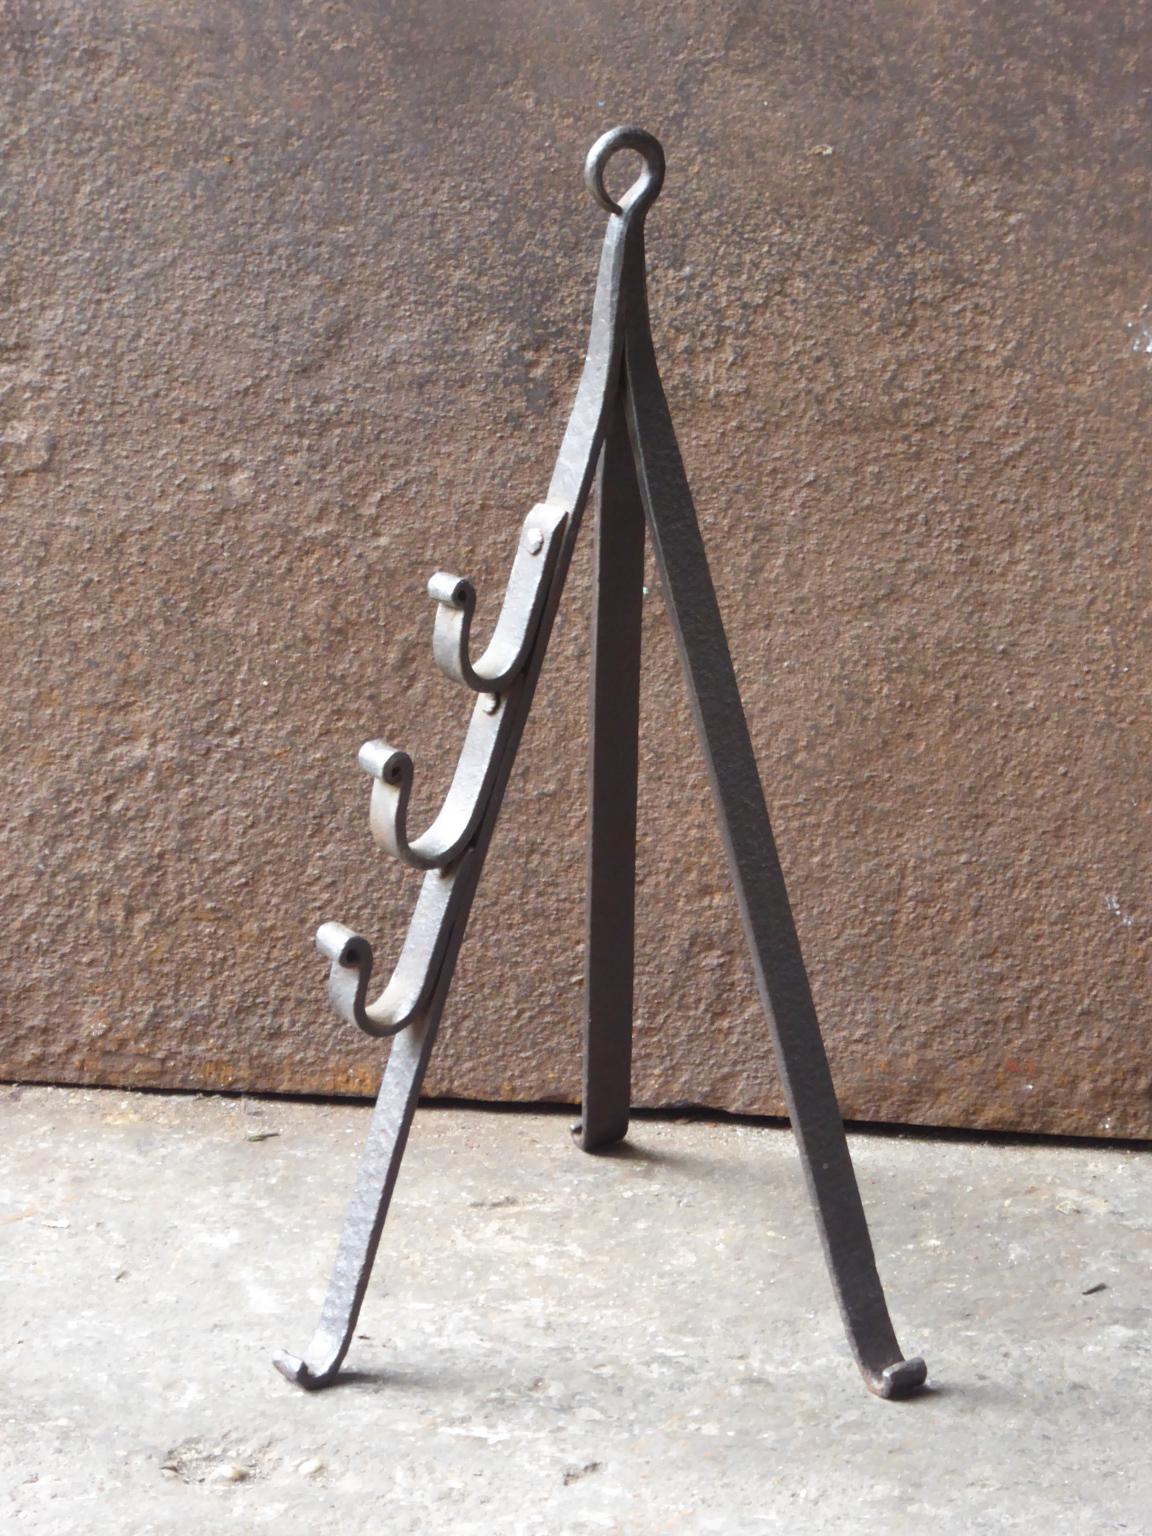 Late 18th or early 19th century French neoclassical period stand for a roasting jack. The stand is hand forged and made of wrought iron. The condition is good.







